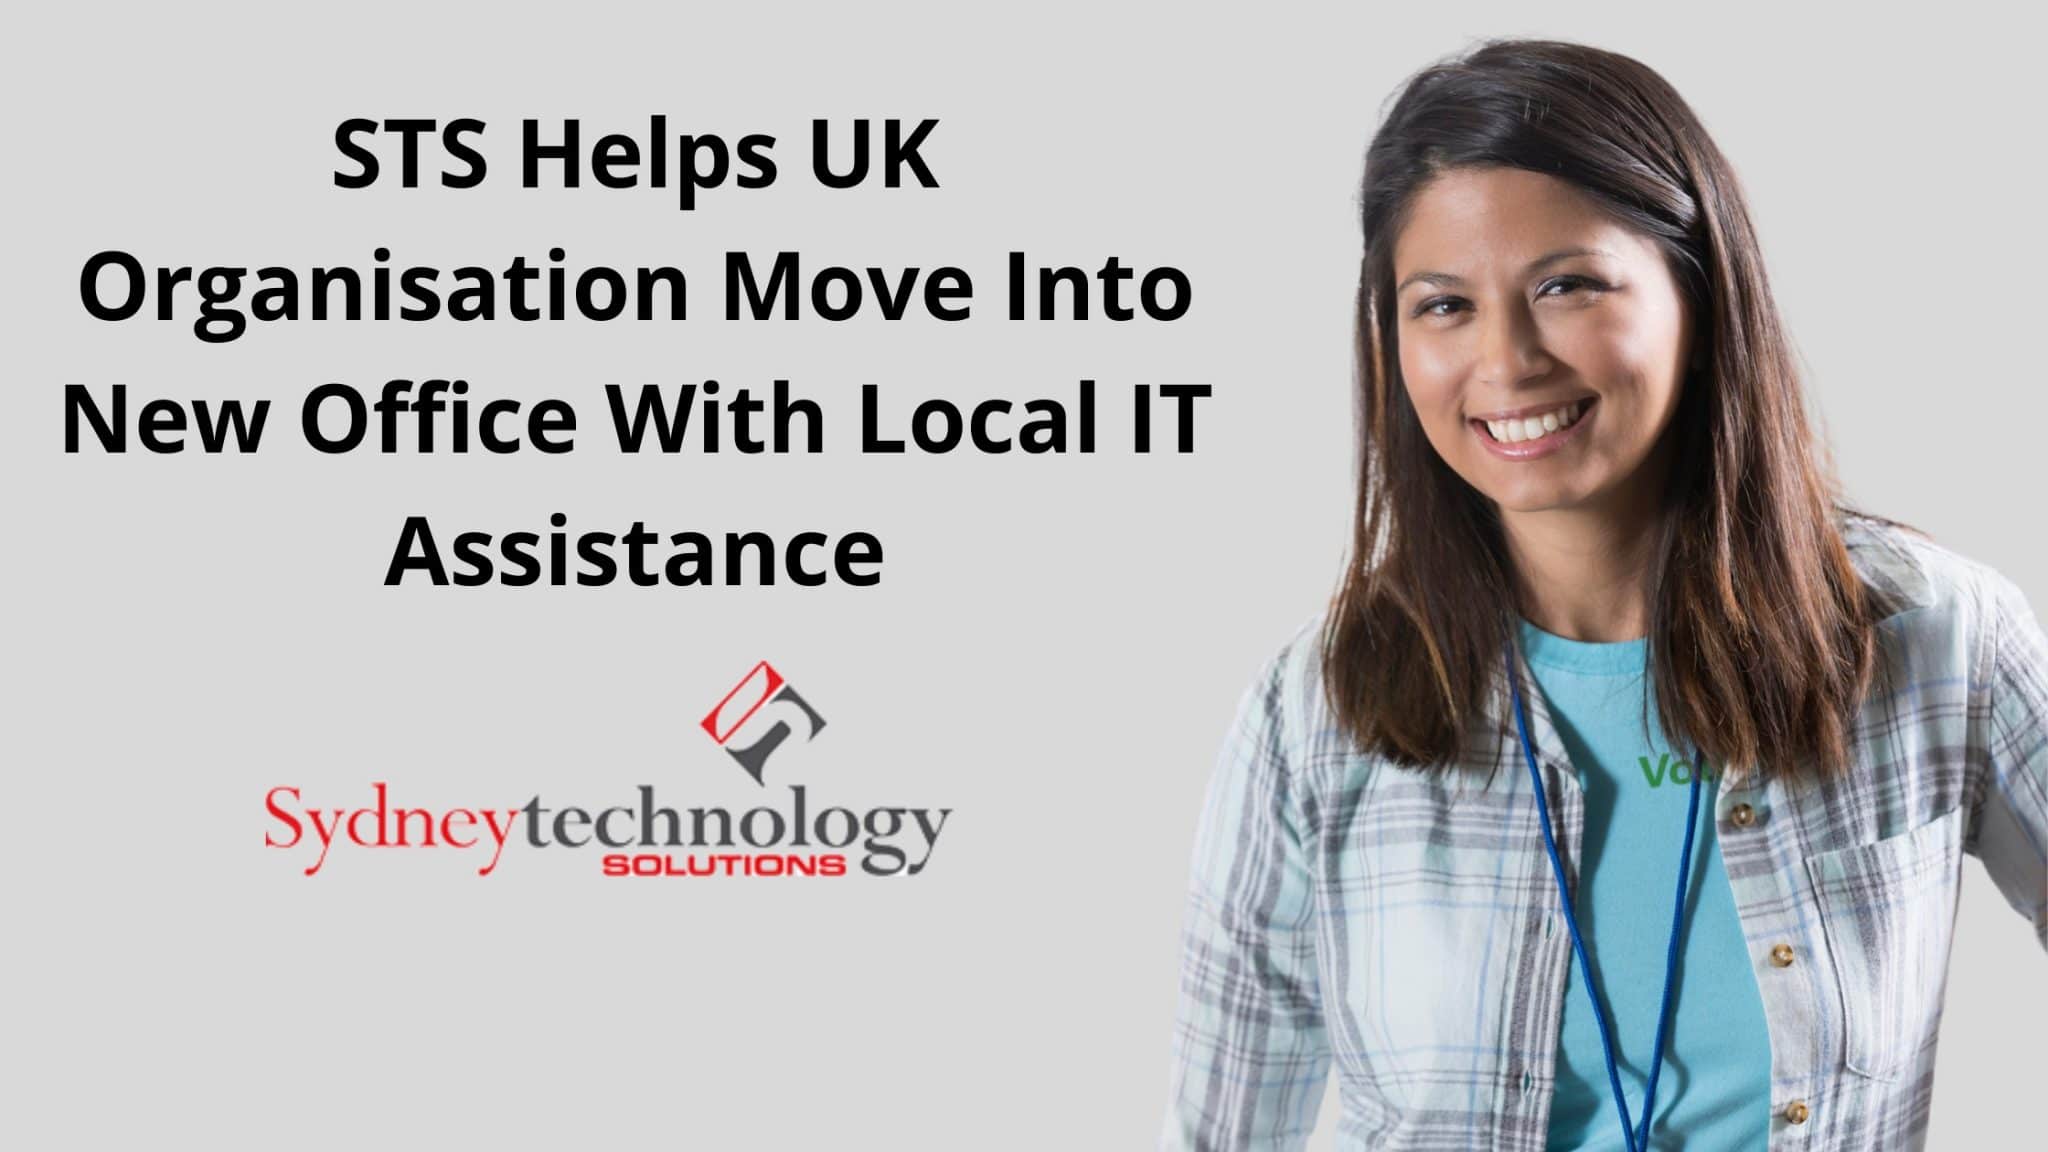 STS Helps UK Organisation Move Into New Office With Local IT Assistance